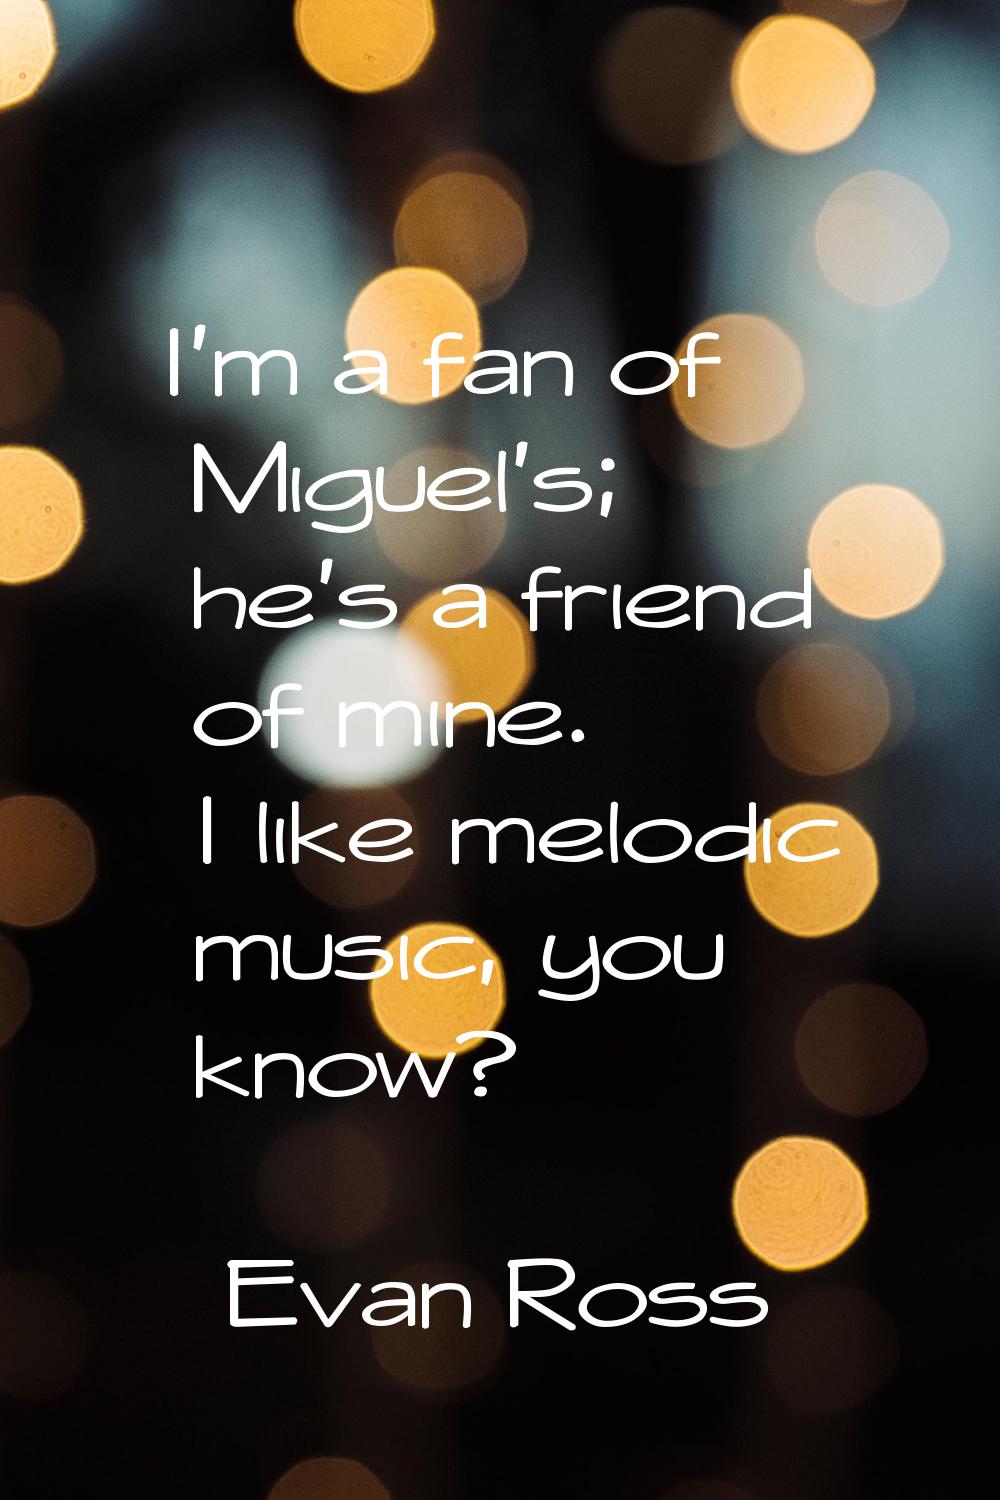 I'm a fan of Miguel's; he's a friend of mine. I like melodic music, you know?